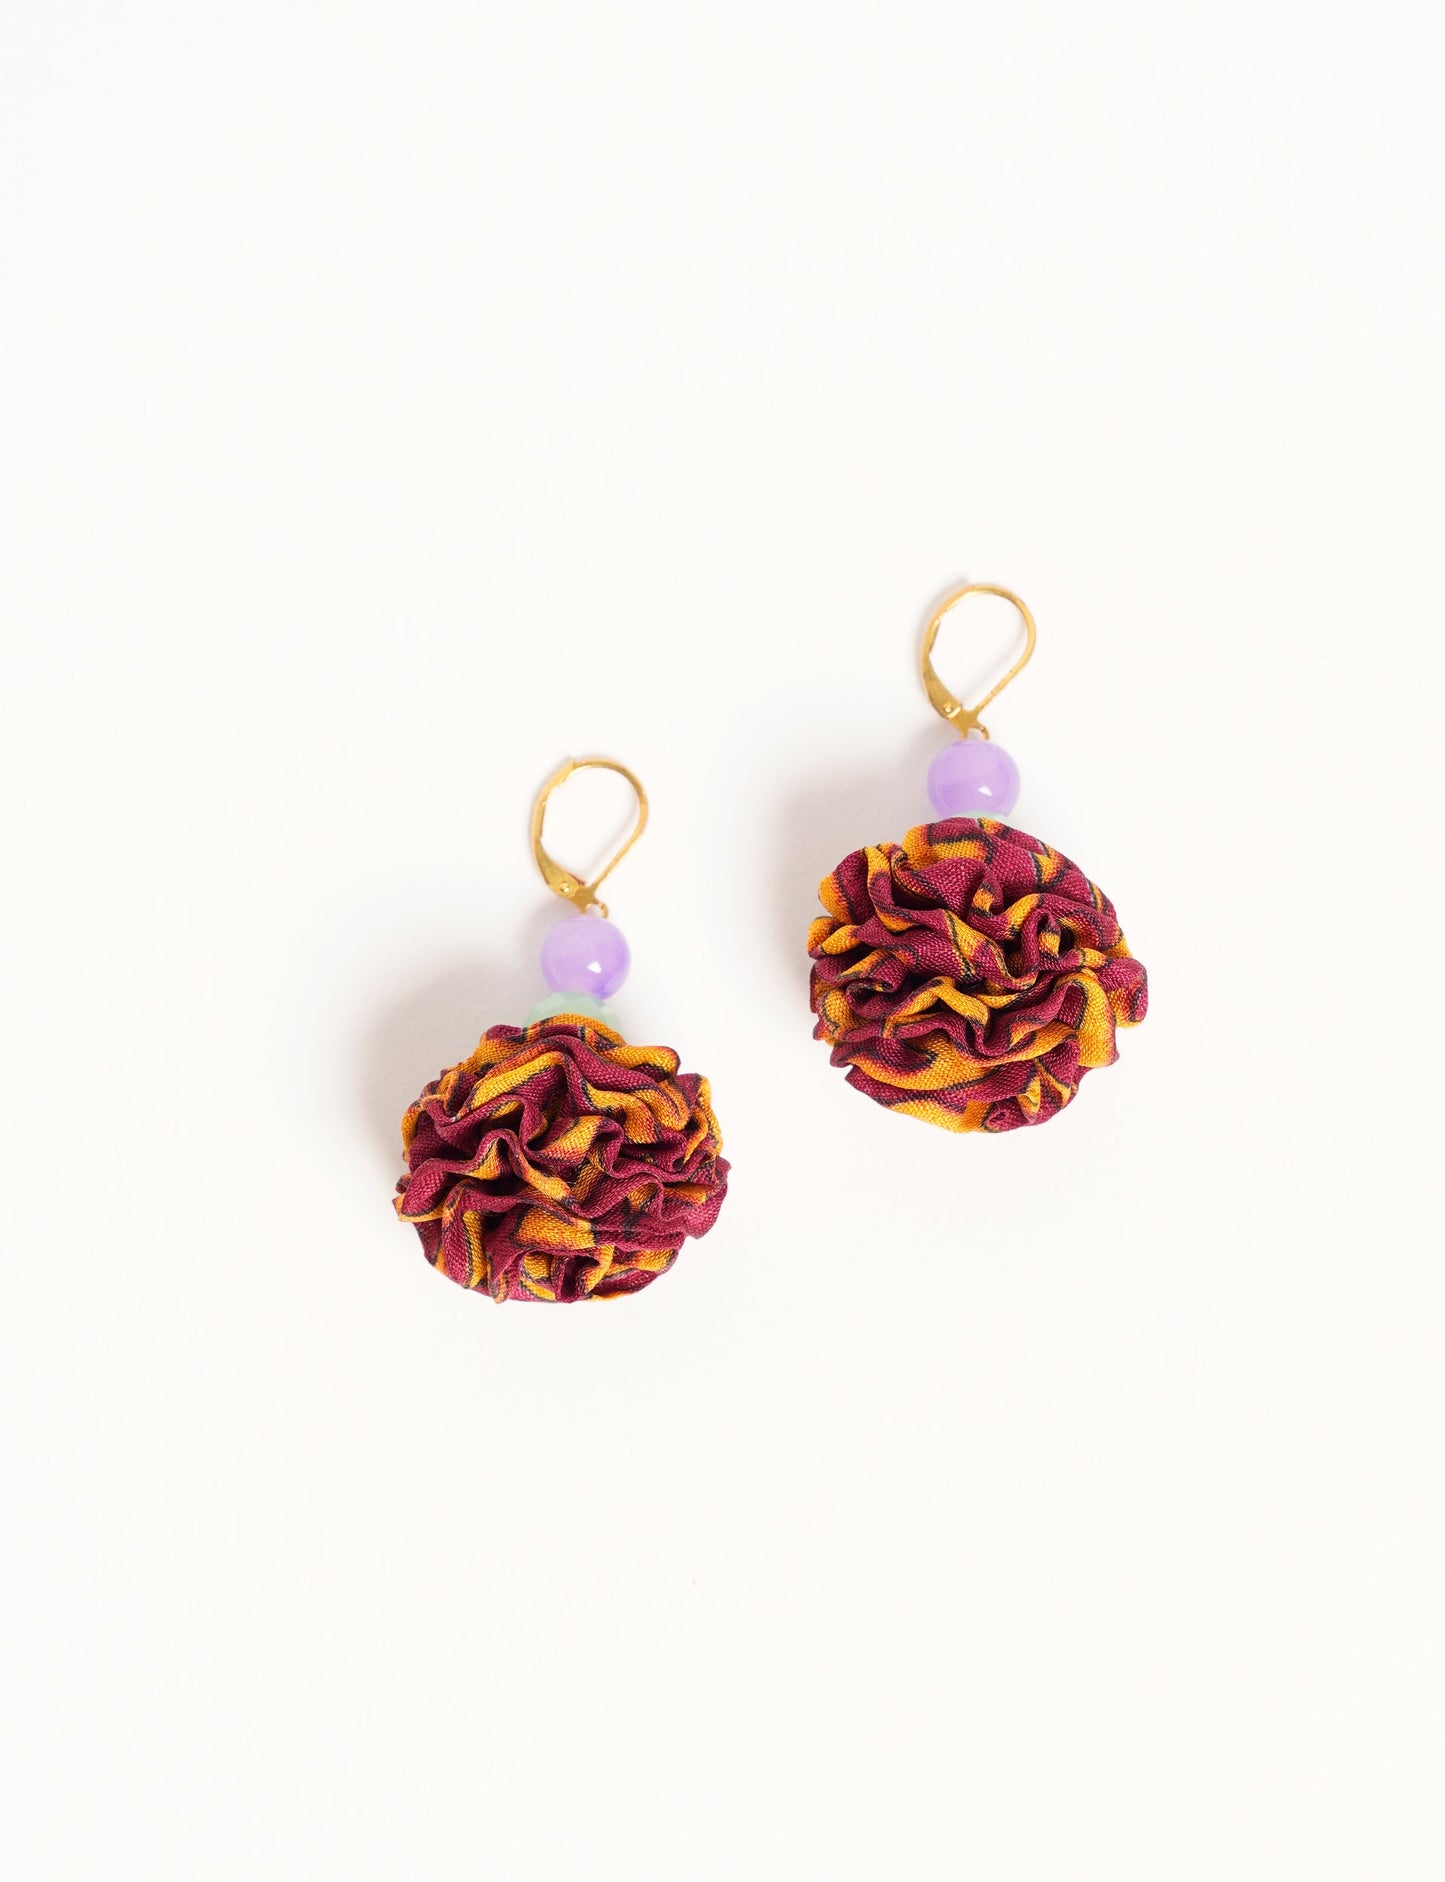 Elevate your style with our Ruffle Earrings, adorned with unique ruffle ball florets crafted from upcycled Indian saris using the traditional Aari embroidery technique. These sustainable earrings feature two glass beads and nickel-free, hypoallergenic metal hooks. Embrace ethical and green fashion with these statement pieces.